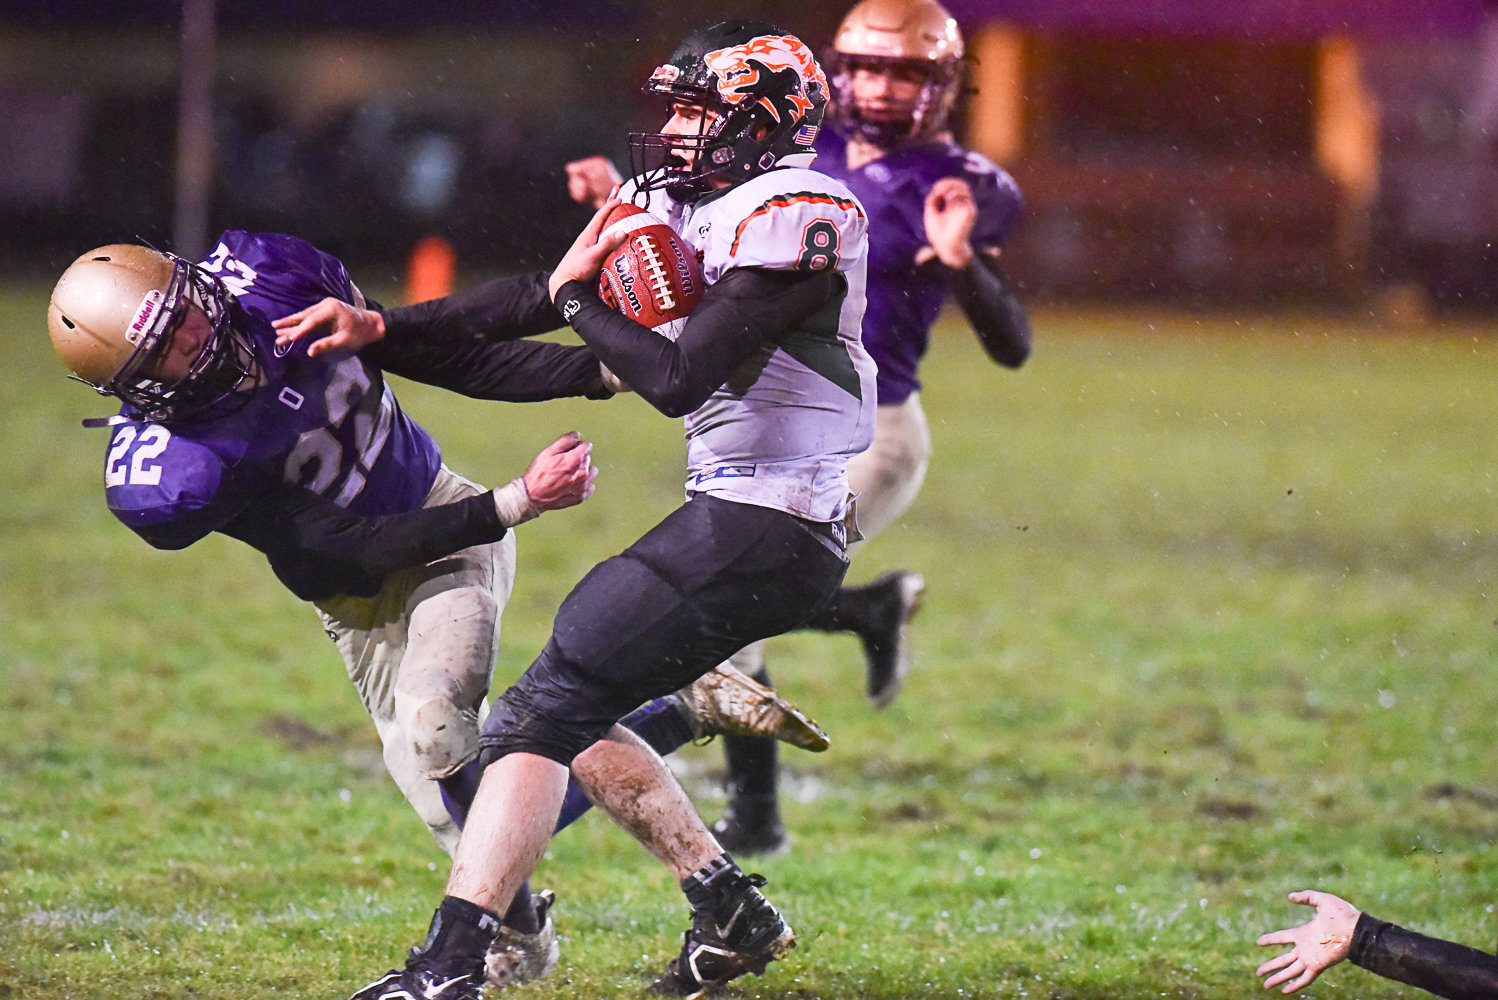 MWP tailback Carter Dantinne ties to throw off Onalaska's Sam Pannkuk during the Loggers' 26-8 win over the T-Wolves in a district crossover on Nov. 4.